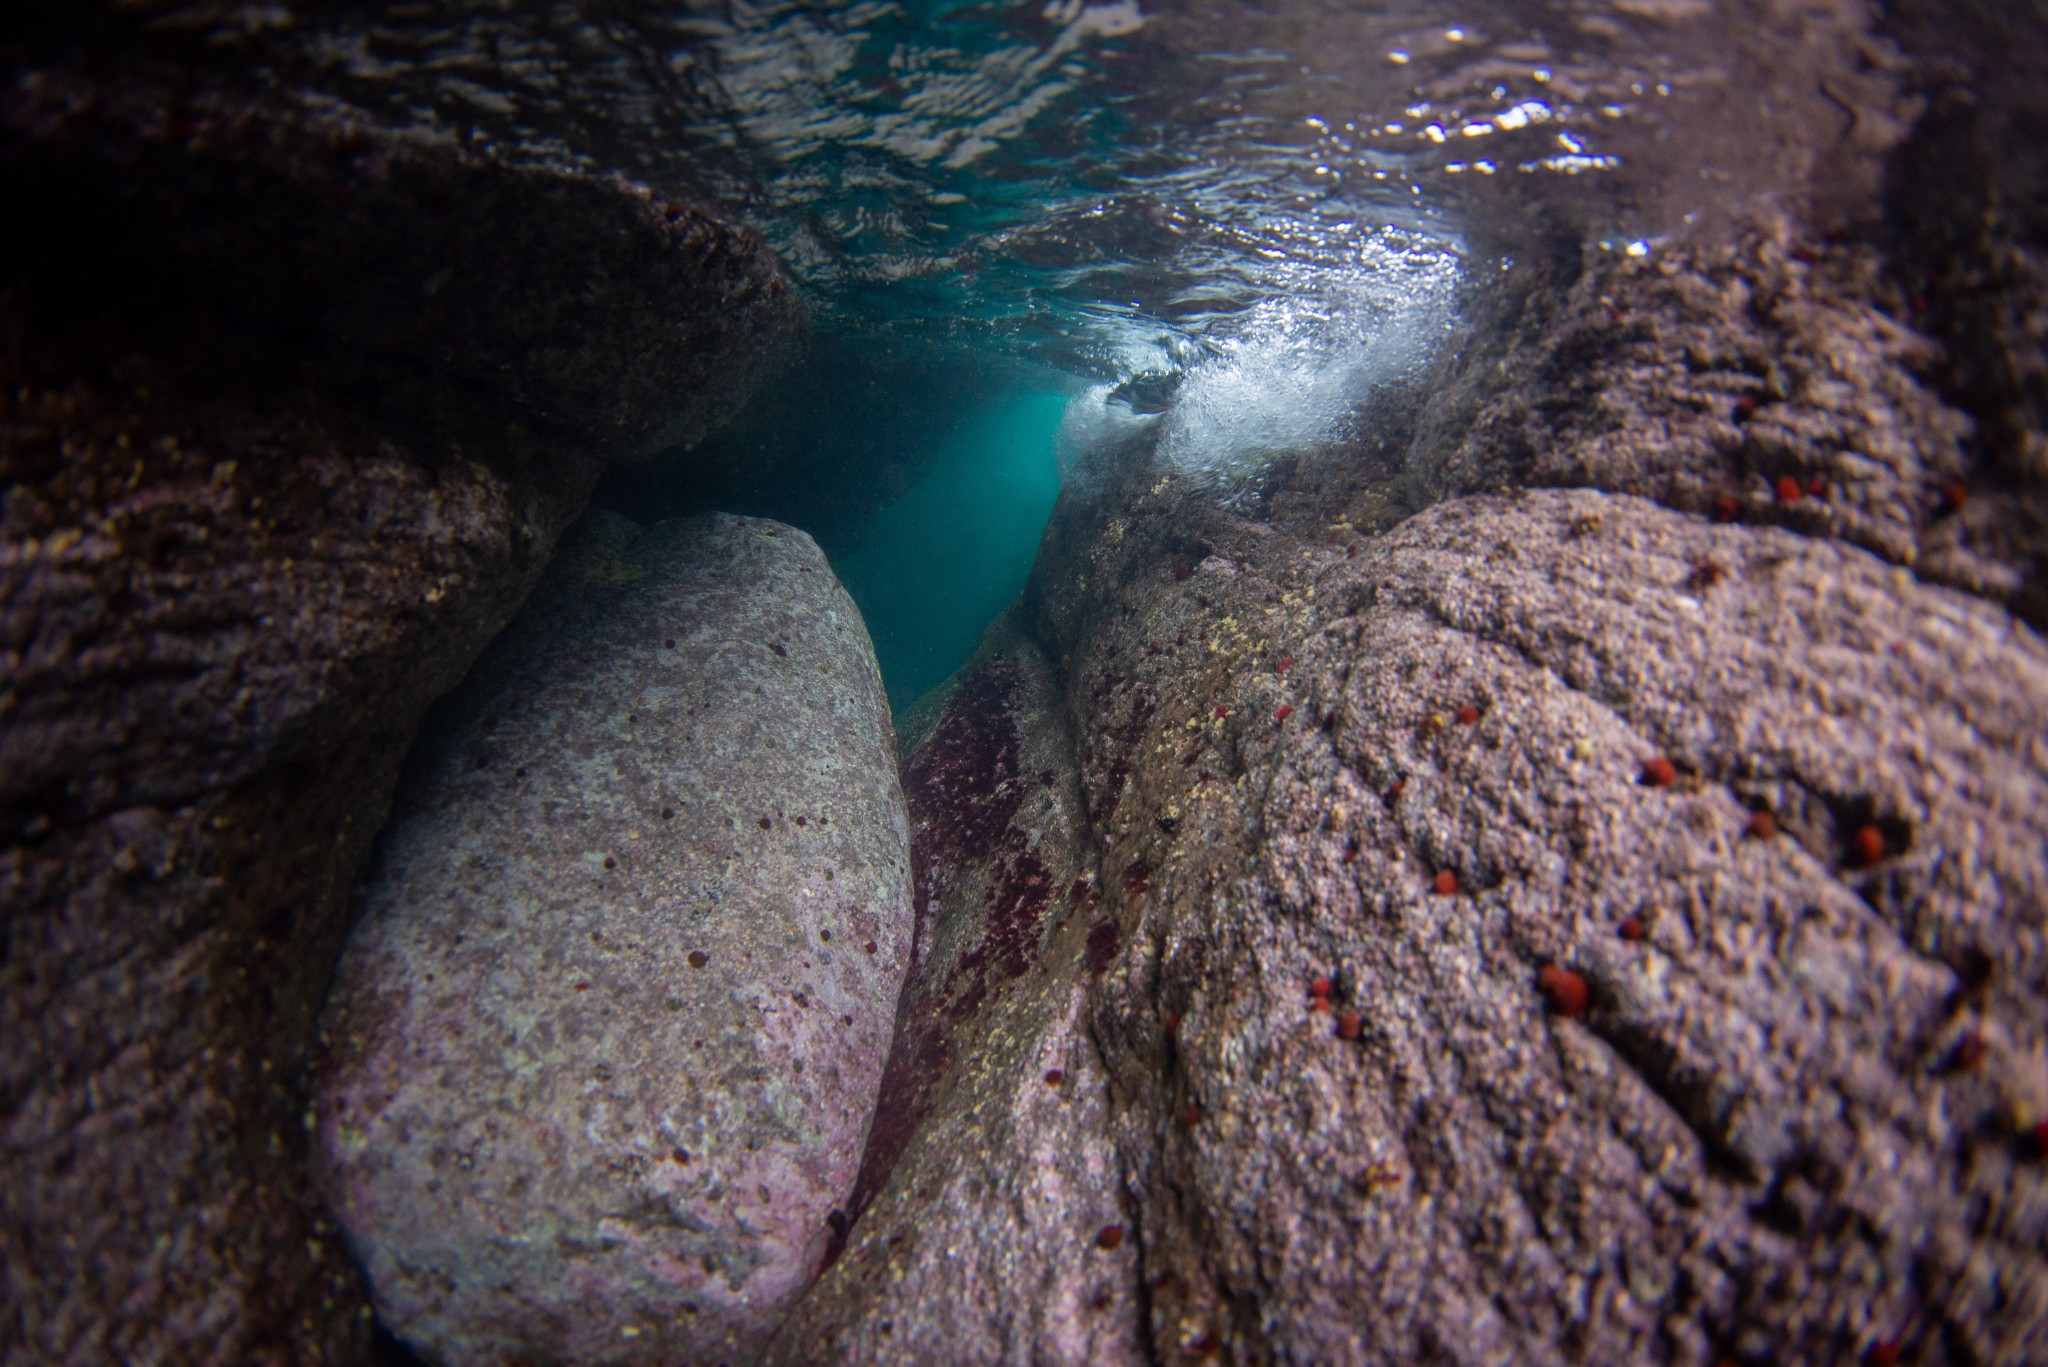 Swimming through the caves at Yesnaby - image by Raymond Besant